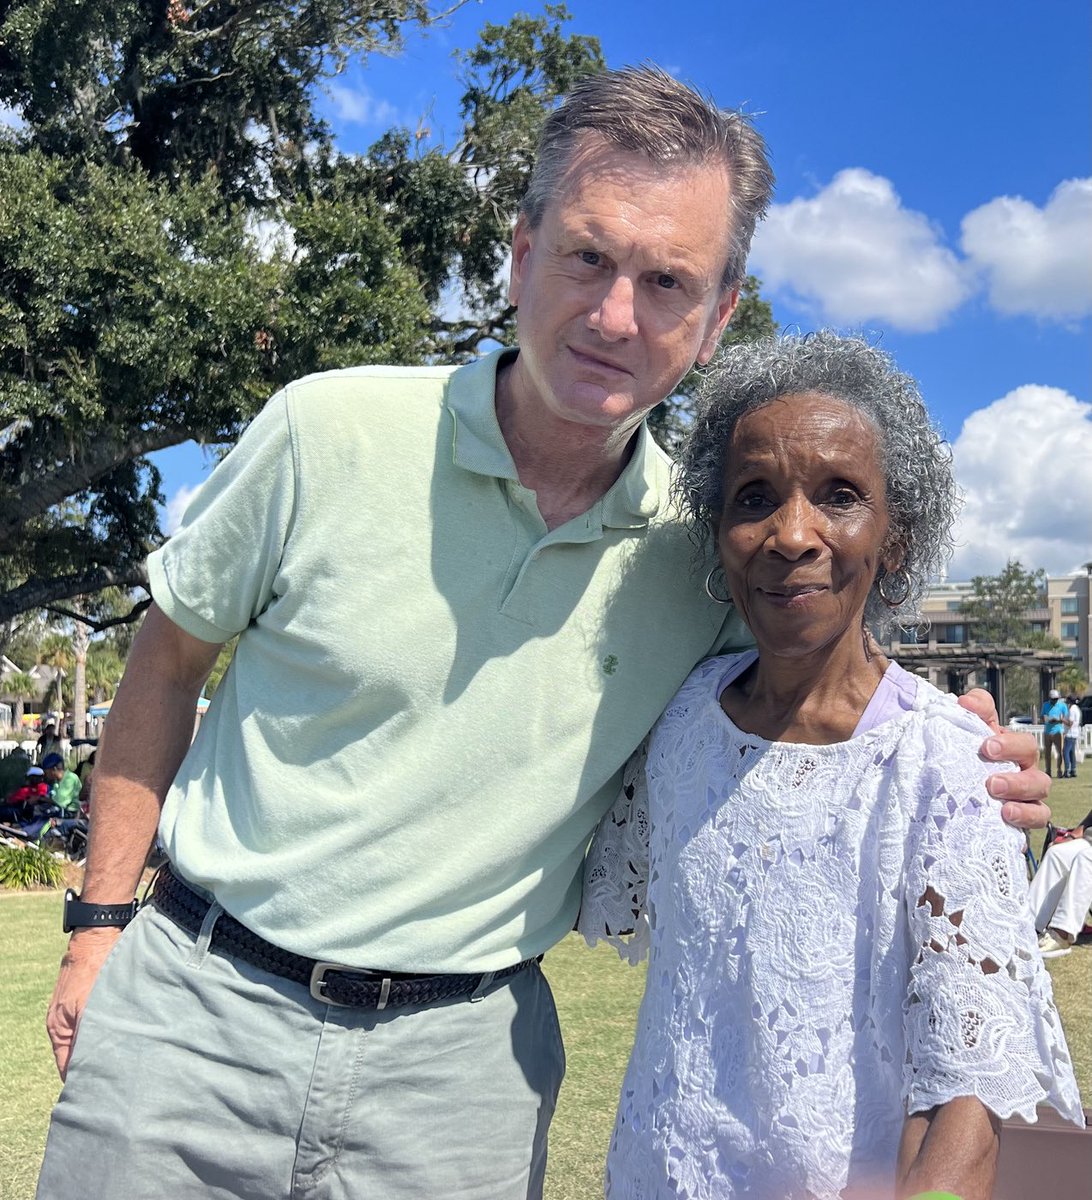 At the Lowcountry Fish & Grits Music Festival right now with a very famous and greatly respected #HiltonHeadIsland lady — Mrs. Josephine Wright. Enjoying some great local cuisine and music and celebrating the rich Gullah Geechee culture and its connection to the African diaspora.